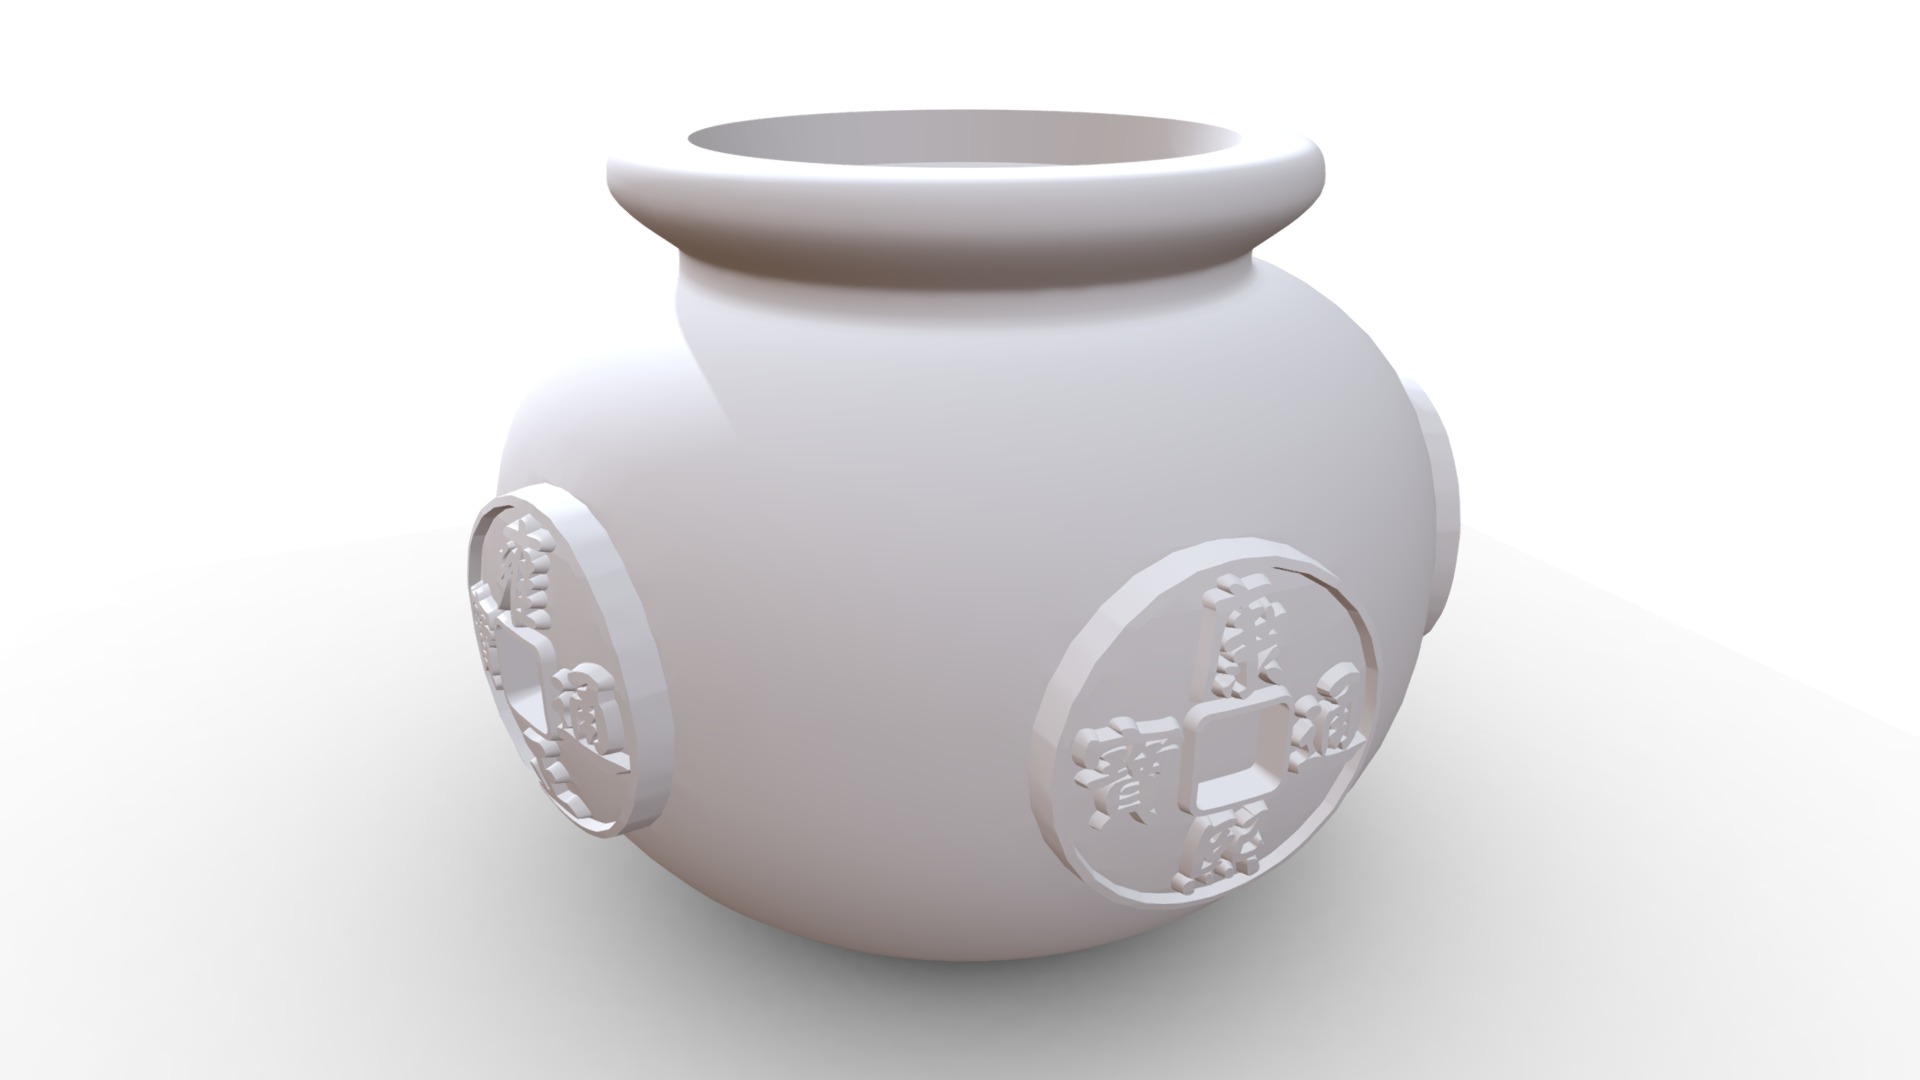 3D model 迷你五帝甕 - This is a 3D model of the 迷你五帝甕. The 3D model is about a white and grey vase.